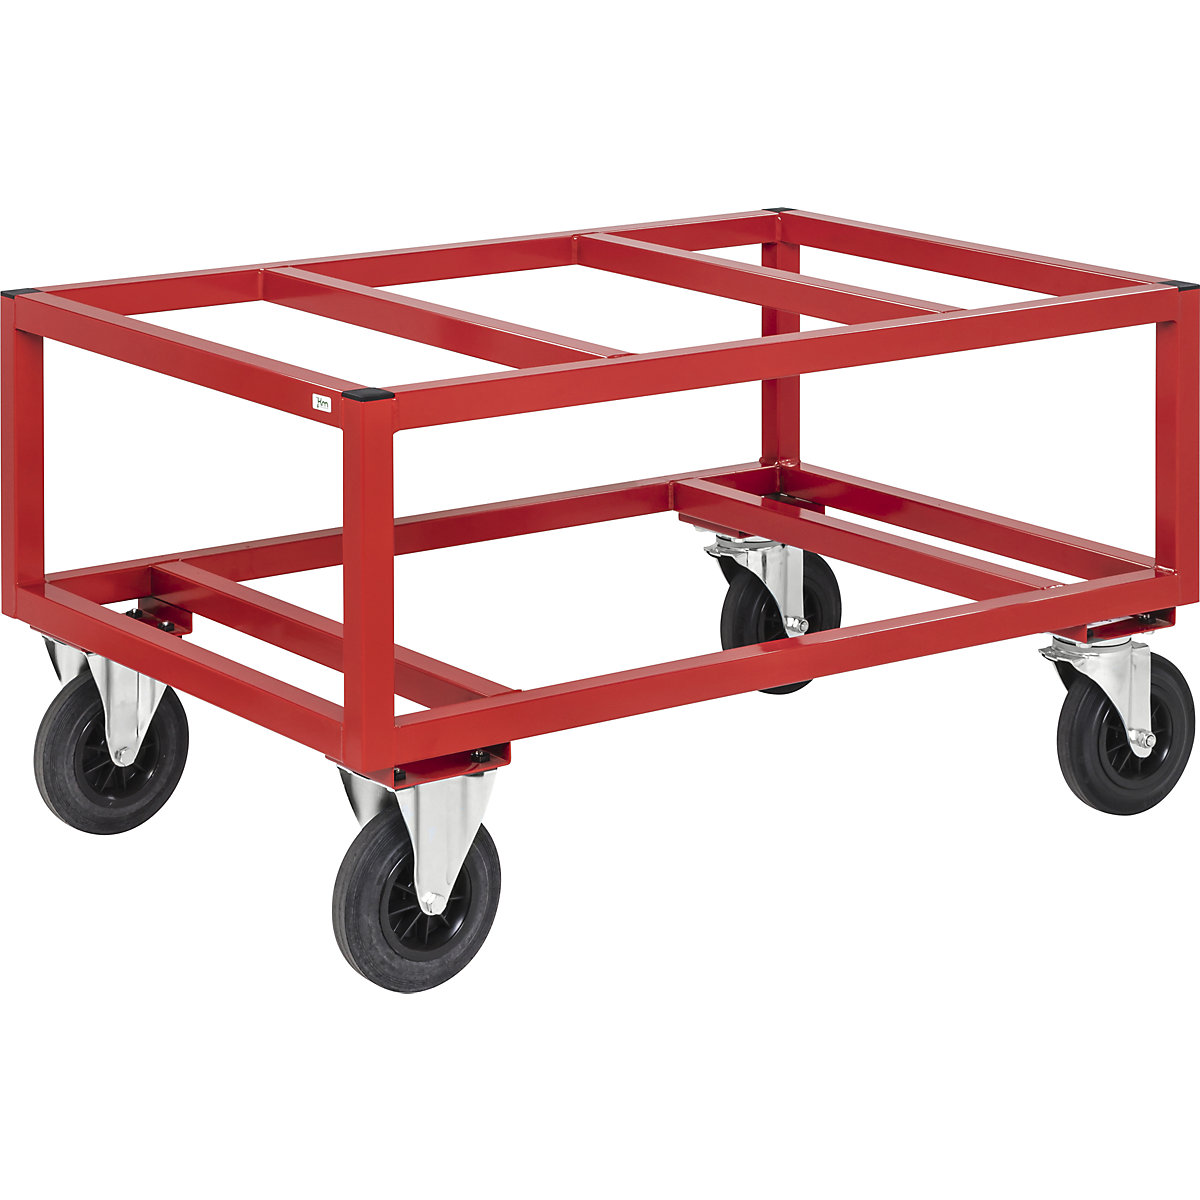 KM221 pallet dolly – Kongamek, LxWxH 1200 x 1000 x 650 mm, red, 2 swivel castors with stops, 2 fixed castors, 5+ items-32